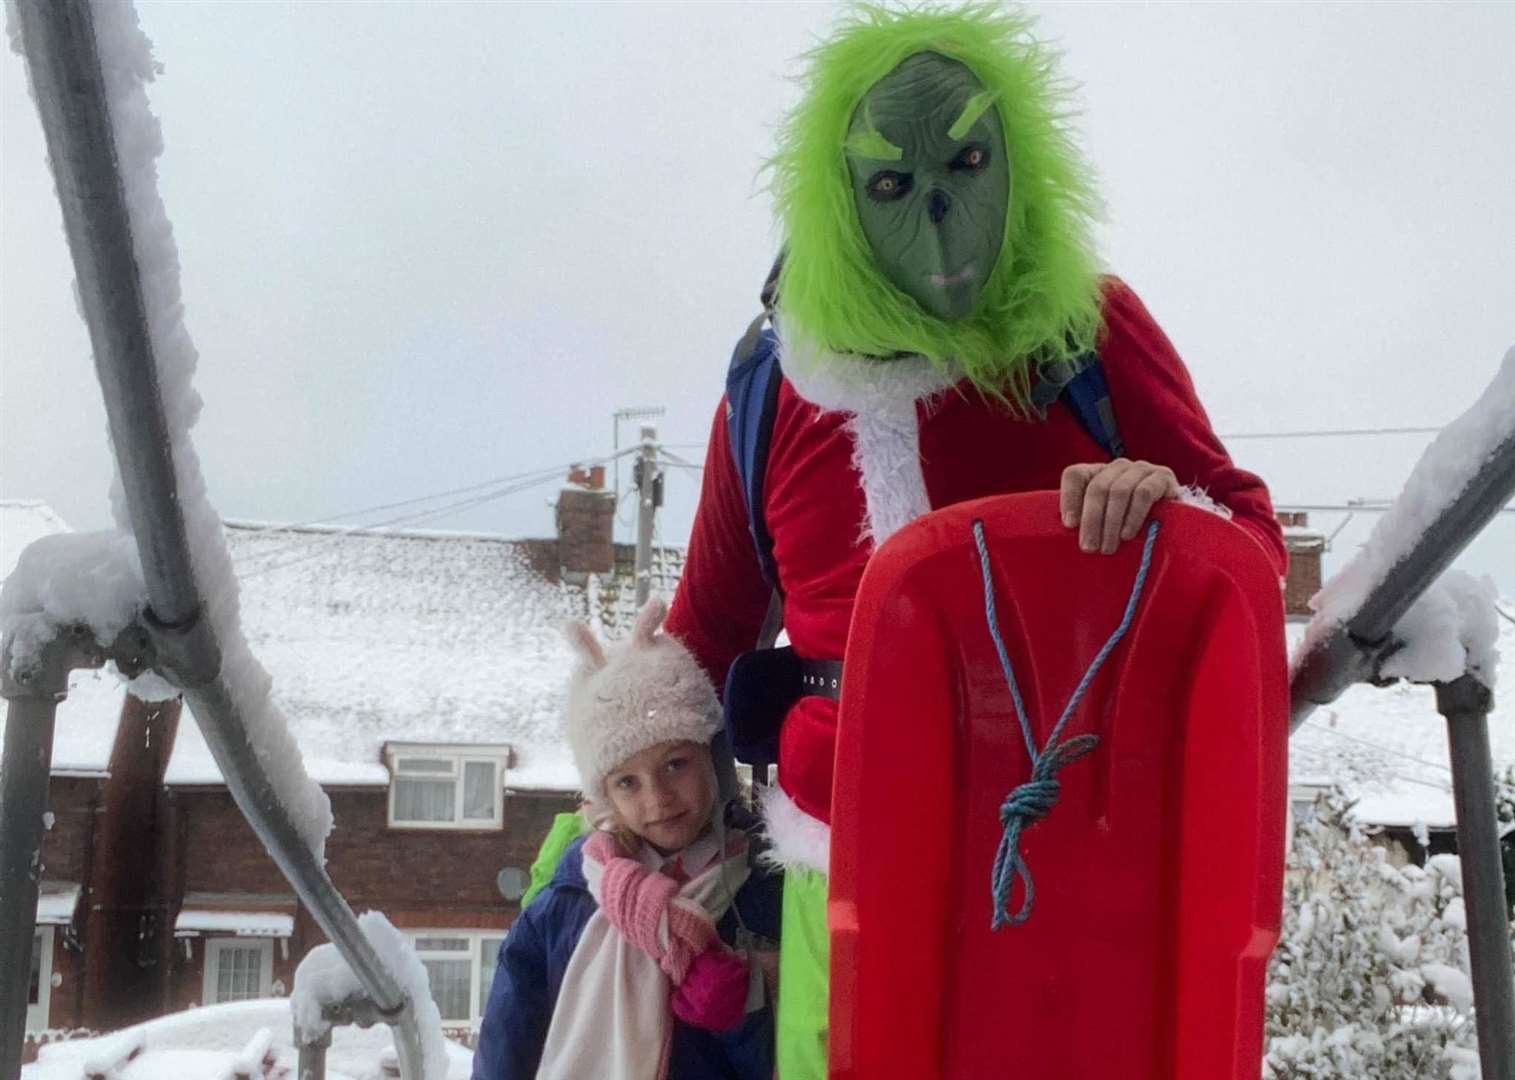 Daniel Wood as the Grinch with his daughter, Isabella